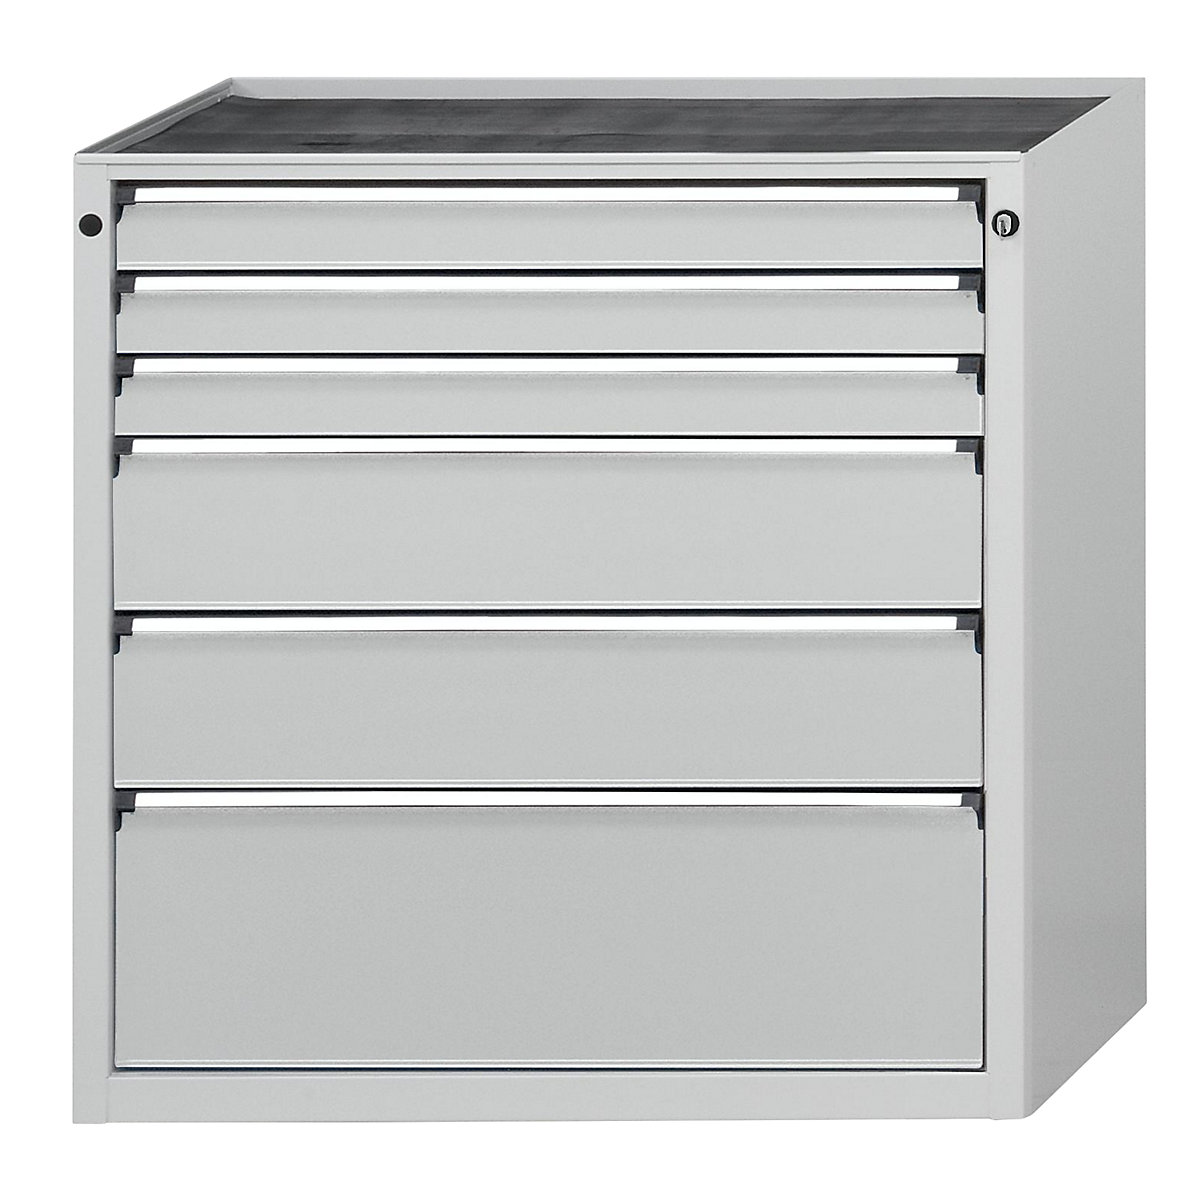 Drawer cupboard without worktop – ANKE, width 910 mm, 6 drawers, front in light grey-1